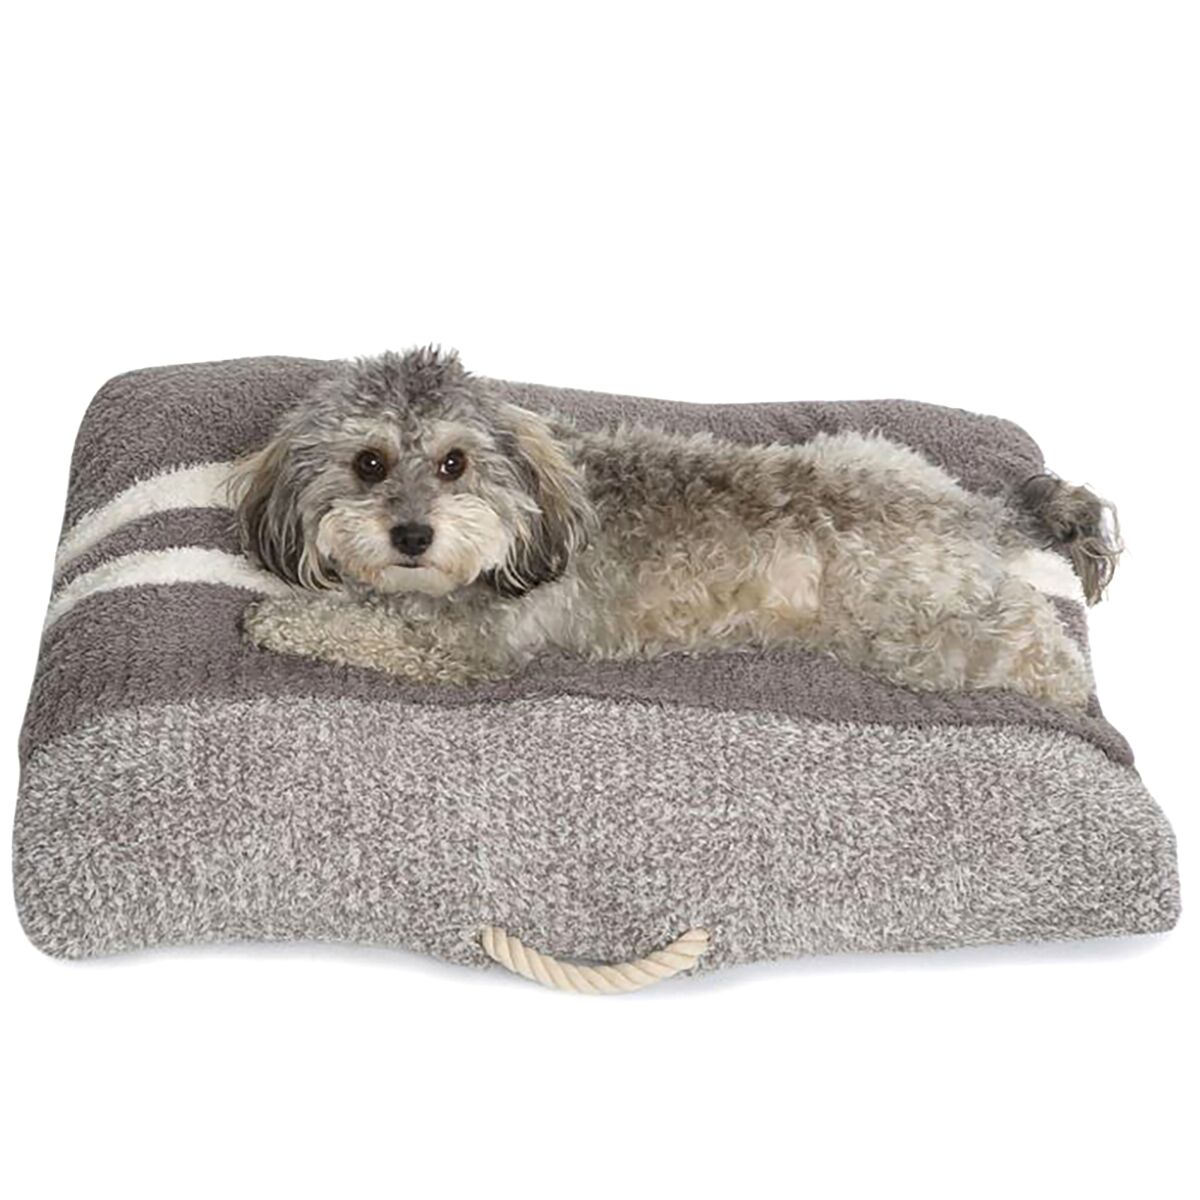 A photo of the CozyChic pet bed from Barefoot Dreams.